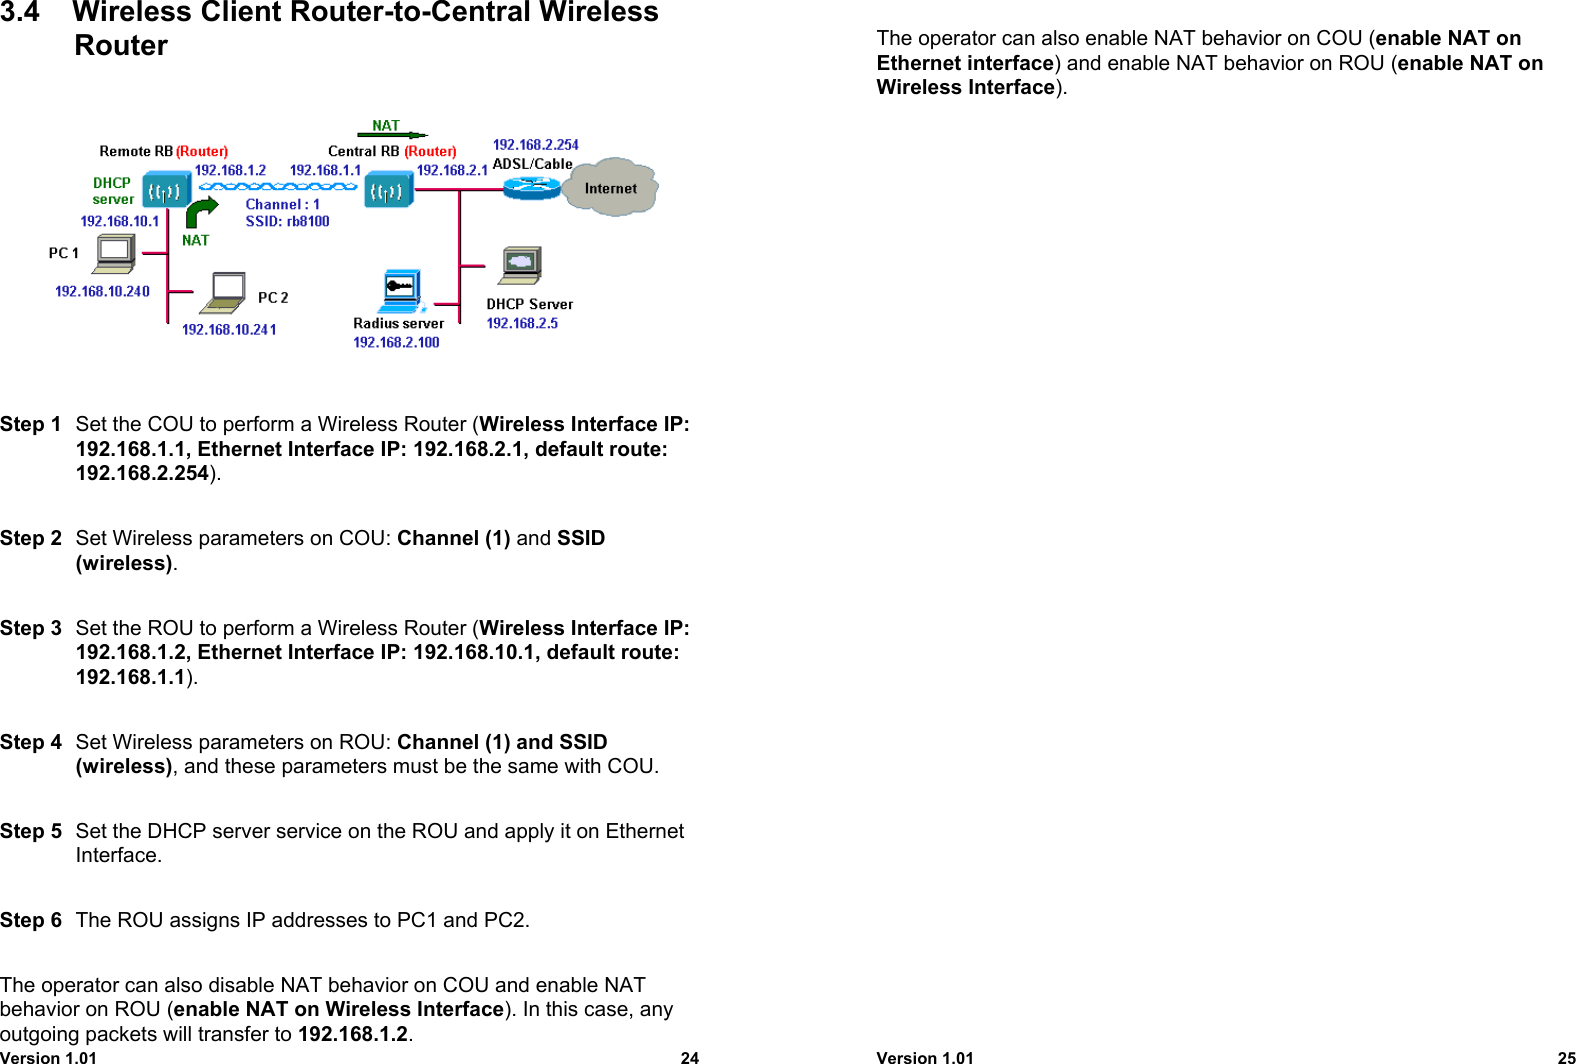 Version 1.01 243.4  Wireless Client Router-to-Central WirelessRouterStep 1 Set the COU to perform a Wireless Router (Wireless Interface IP:192.168.1.1, Ethernet Interface IP: 192.168.2.1, default route:192.168.2.254).Step 2 Set Wireless parameters on COU: Channel (1) and SSID(wireless).Step 3 Set the ROU to perform a Wireless Router (Wireless Interface IP:192.168.1.2, Ethernet Interface IP: 192.168.10.1, default route:192.168.1.1).Step 4 Set Wireless parameters on ROU: Channel (1) and SSID(wireless), and these parameters must be the same with COU.Step 5 Set the DHCP server service on the ROU and apply it on EthernetInterface.Step 6 The ROU assigns IP addresses to PC1 and PC2.The operator can also disable NAT behavior on COU and enable NATbehavior on ROU (enable NAT on Wireless Interface). In this case, anyoutgoing packets will transfer to 192.168.1.2.Version 1.01 25The operator can also enable NAT behavior on COU (enable NAT onEthernet interface) and enable NAT behavior on ROU (enable NAT onWireless Interface).